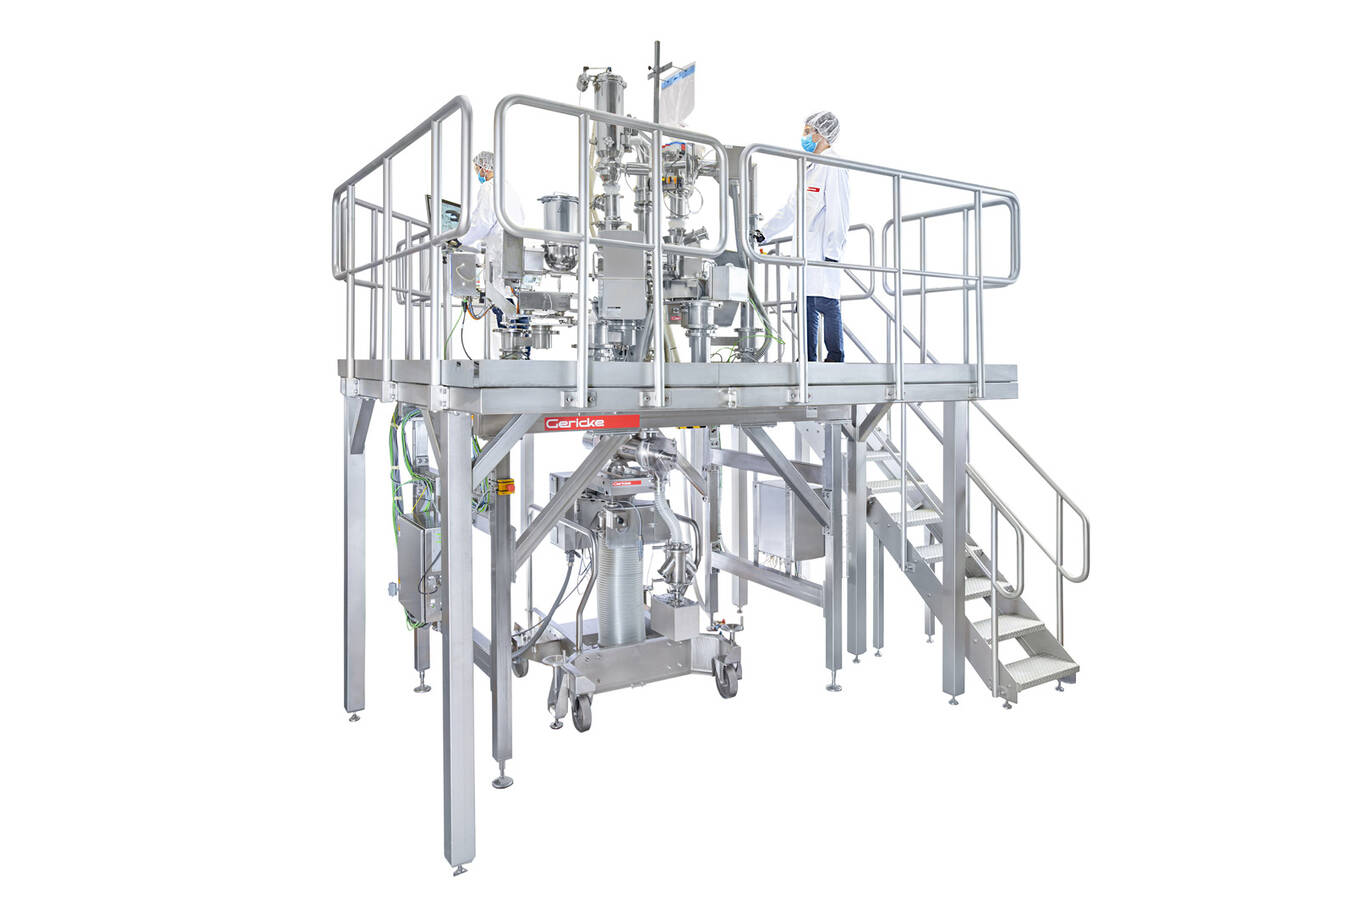 Gericke Formulation Skid GFS for Continuous Manufacturing.